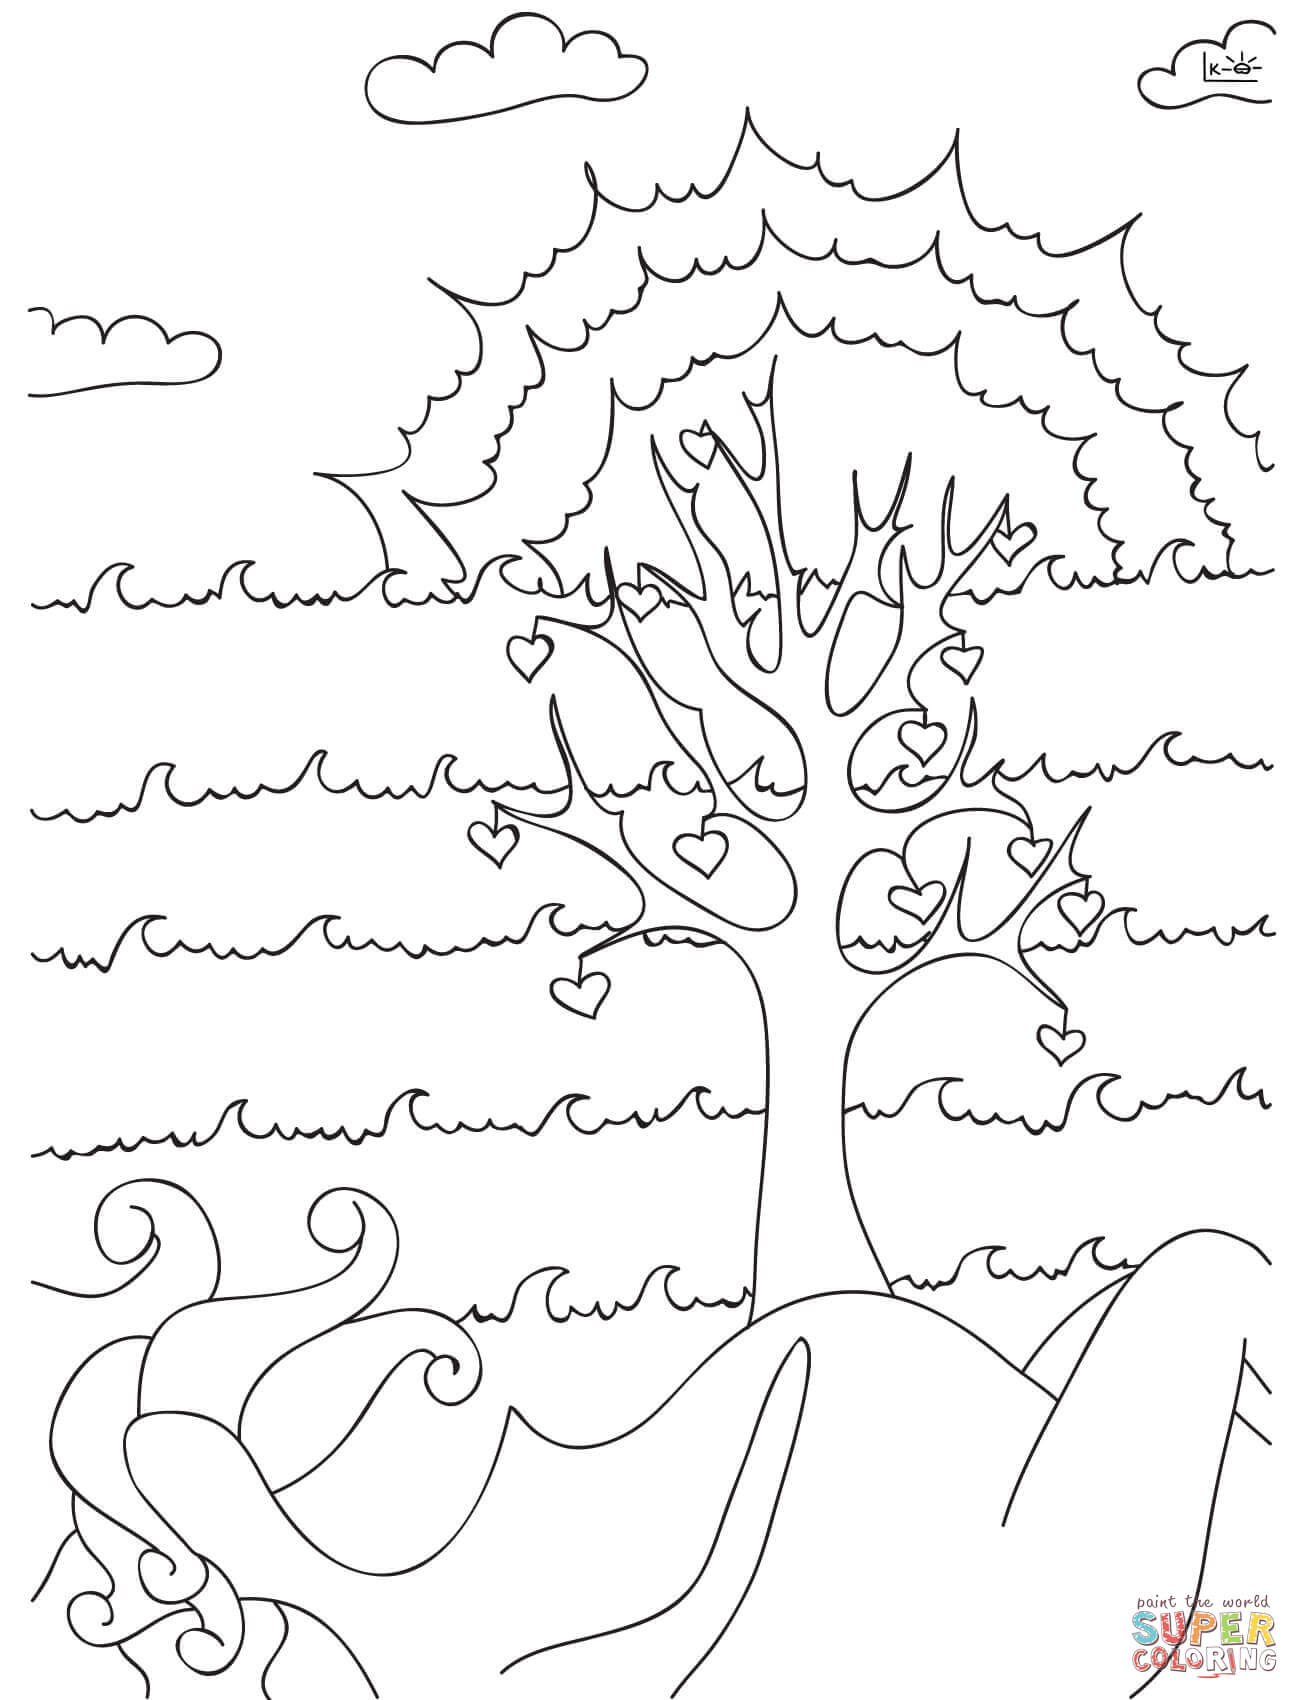 Celtic Tree Of Life Coloring Pages at Free printable